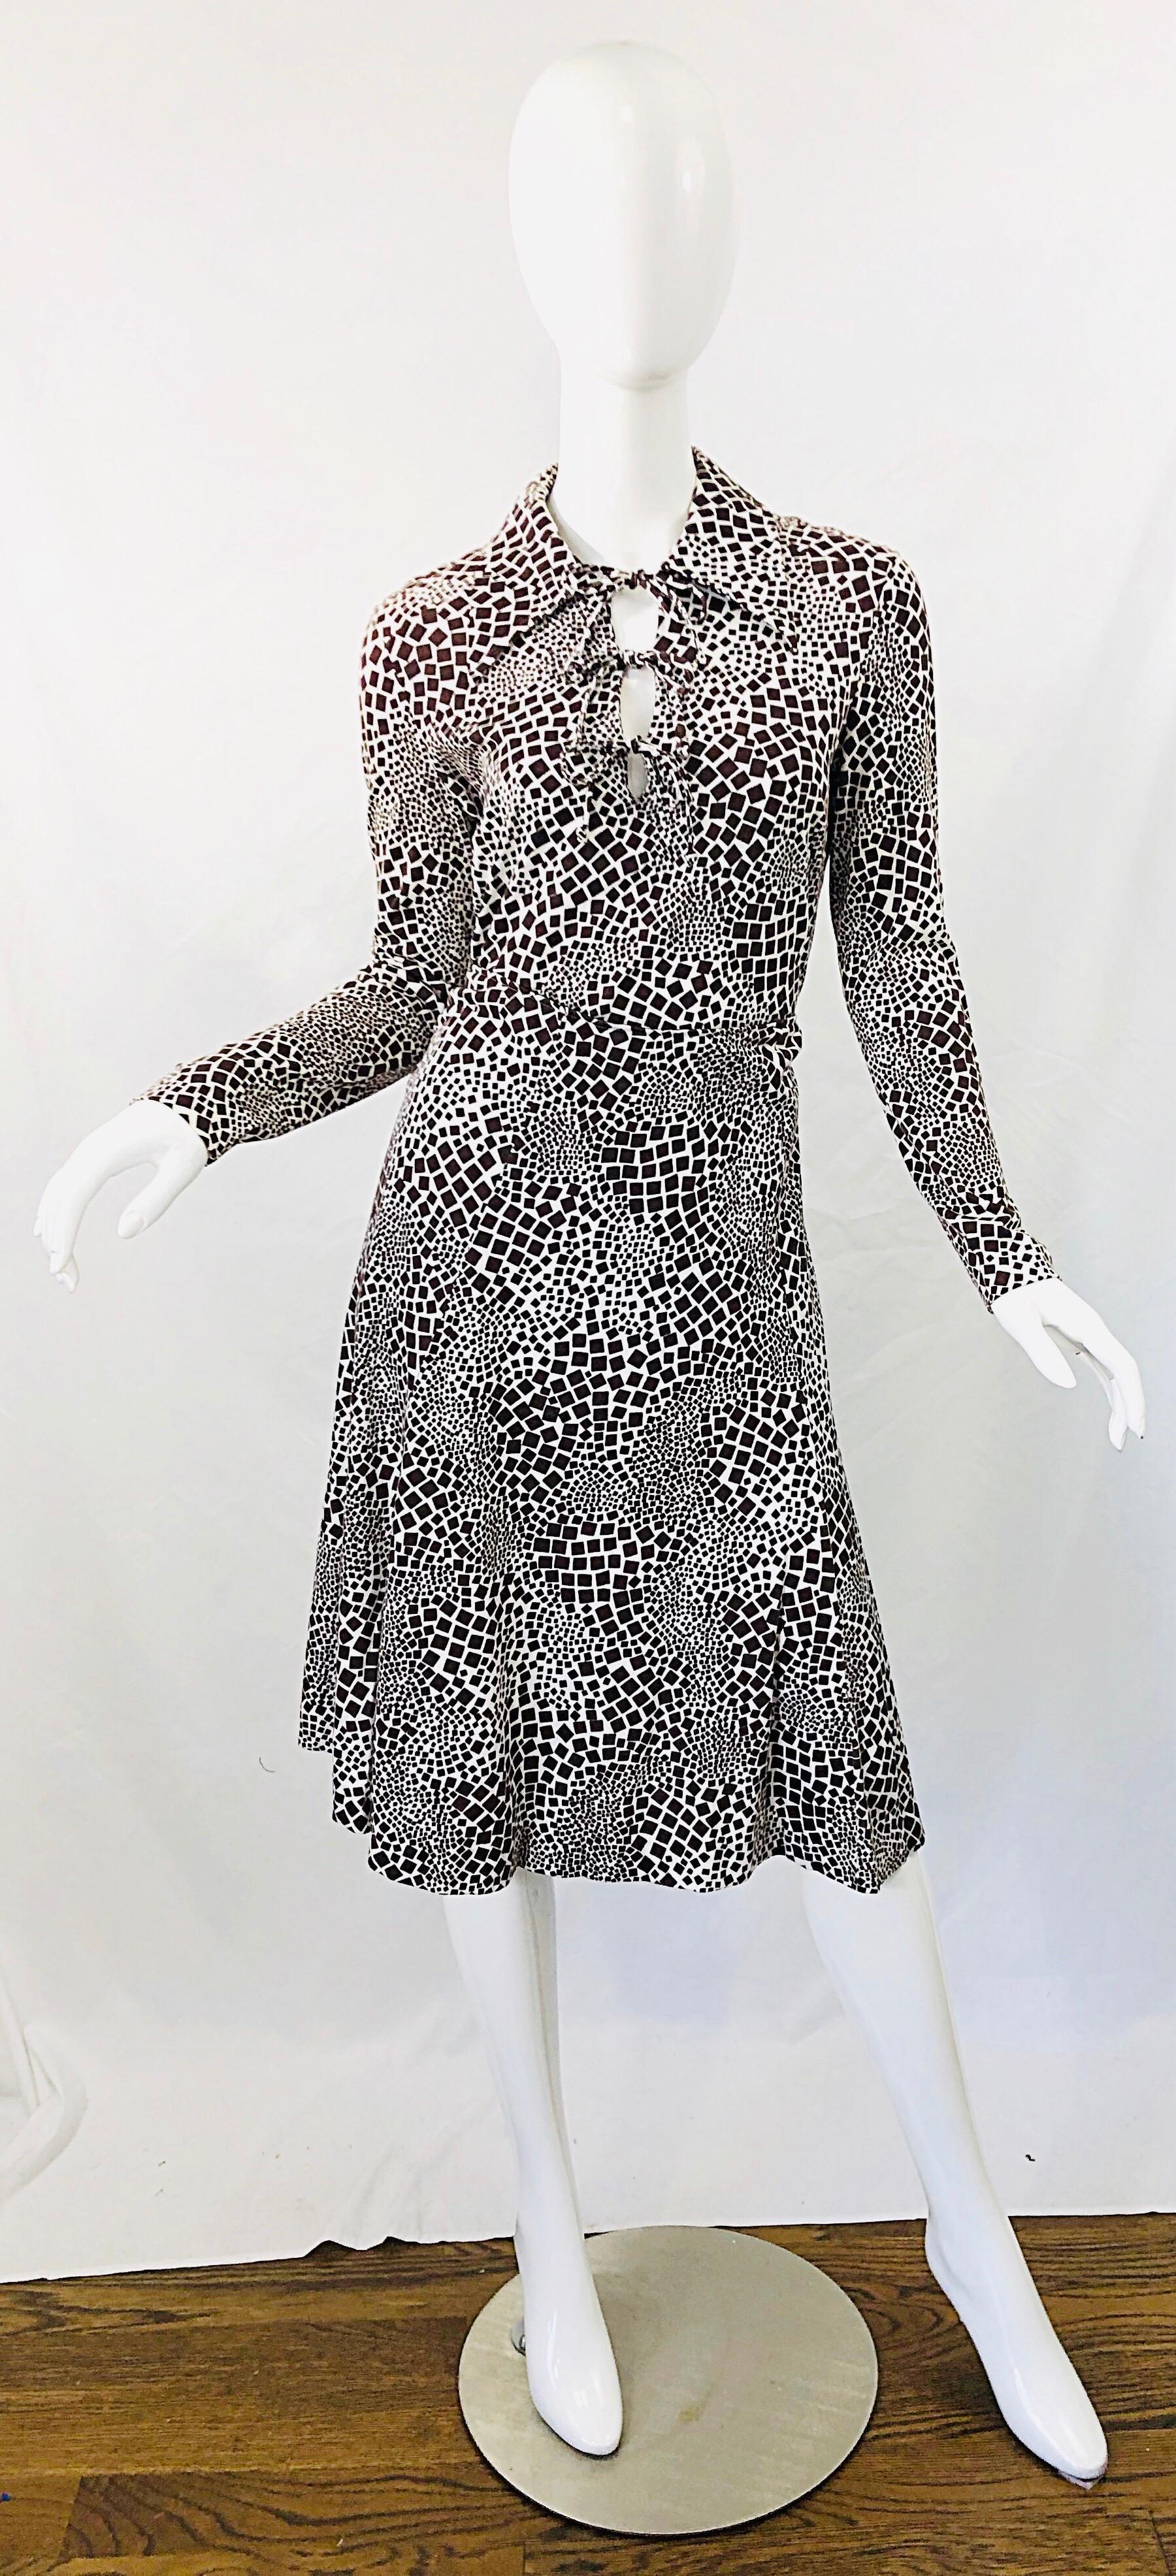 Chic 1970s DIANE VON FURSTENBERG chocolate brown and white abstract print cut-out shirt and skirt. Soft rayon and cotton blend fabric. Cut-out at center neck with three ties. Skirt features hidden metal zipper up the back with hook-and-eye closure.